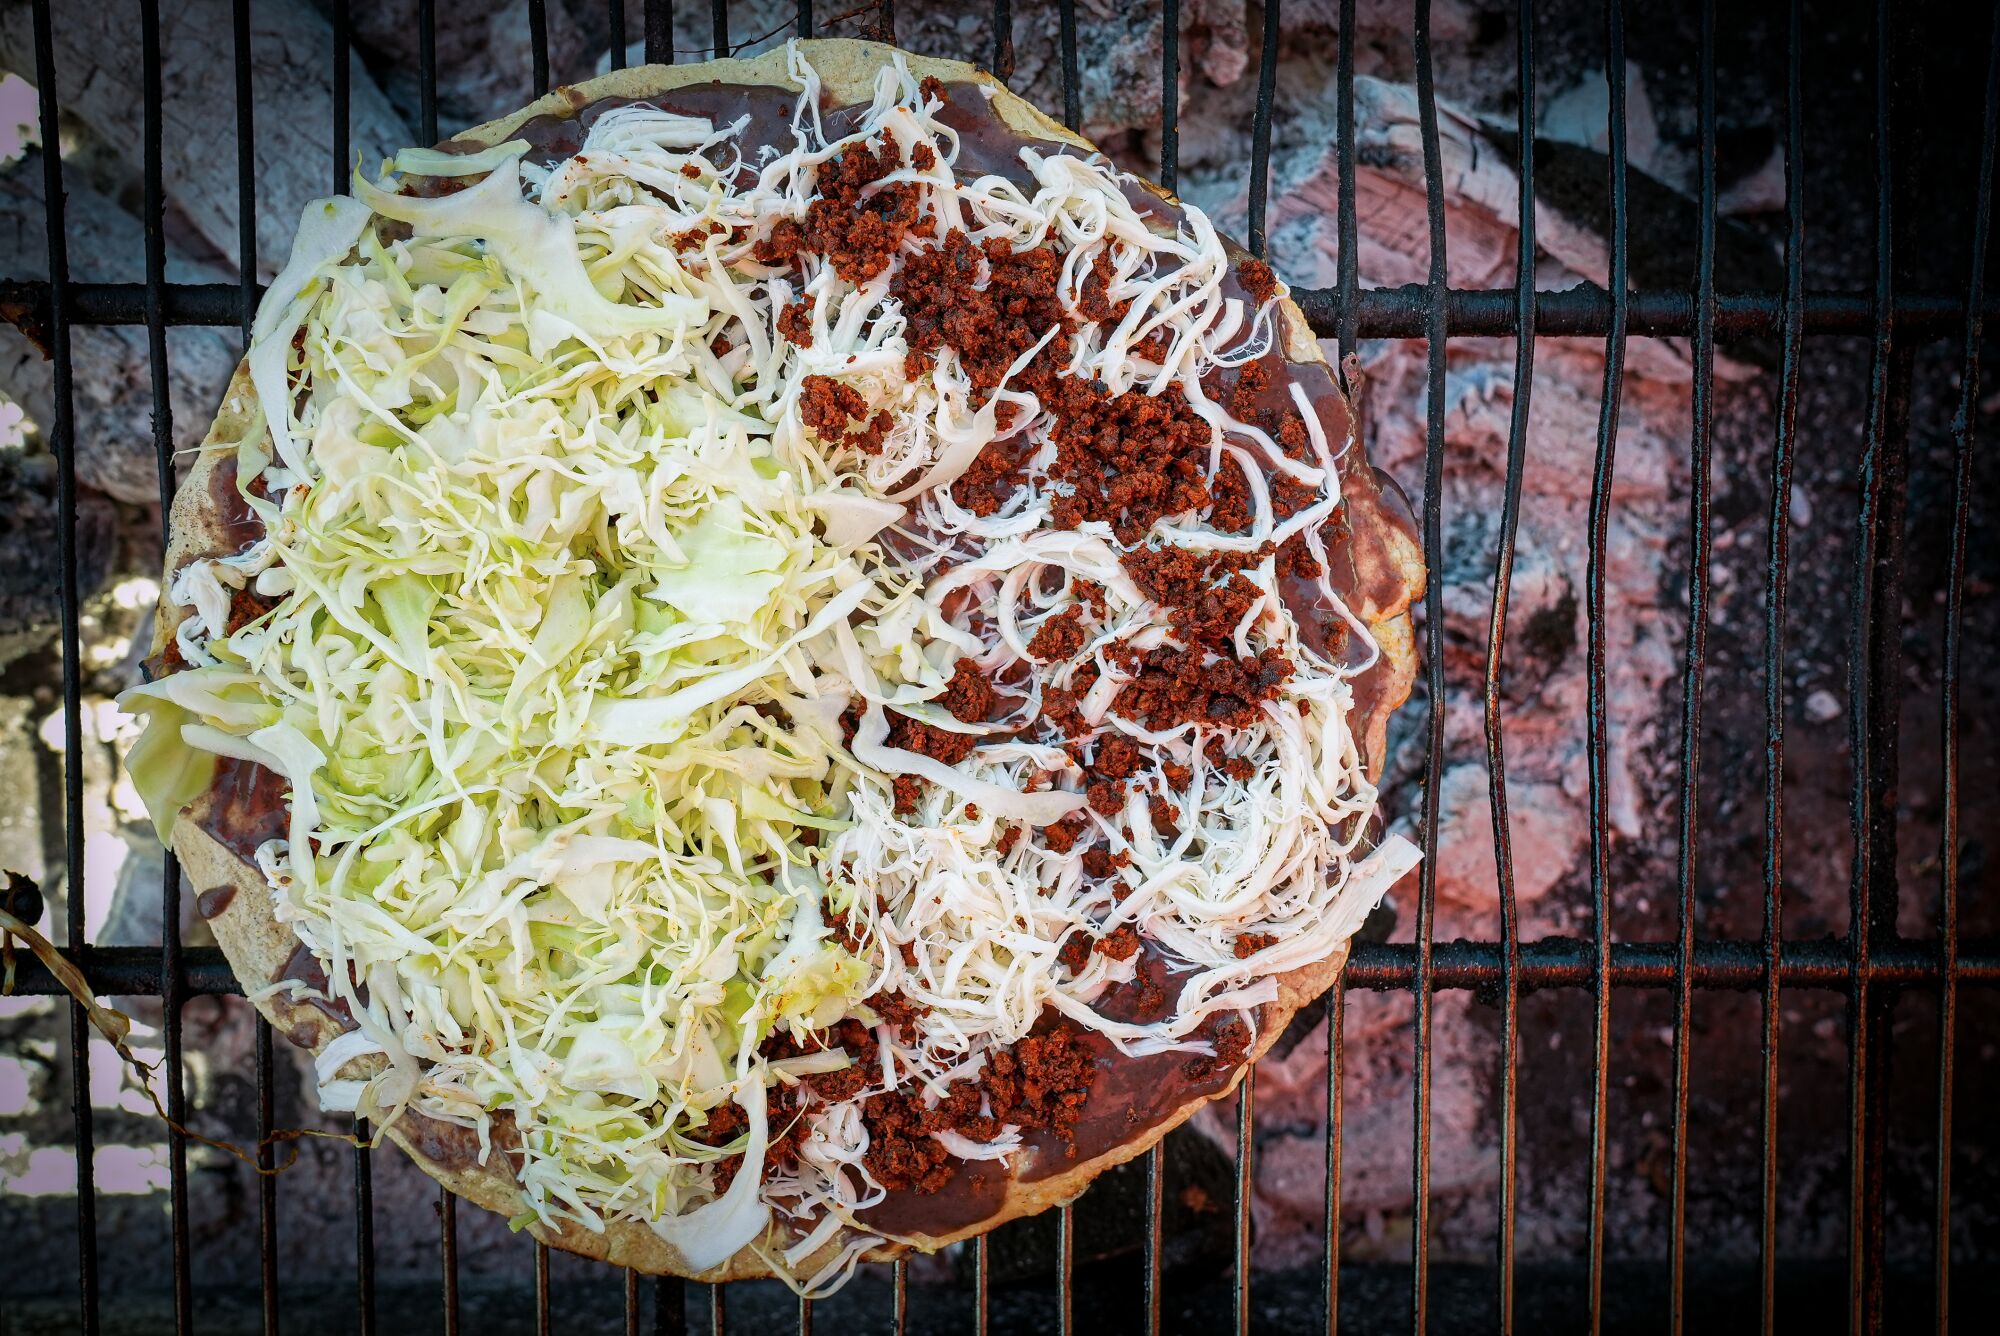 A flat Mixta tlayuda with three meats, cabbage and cheese on the grill.